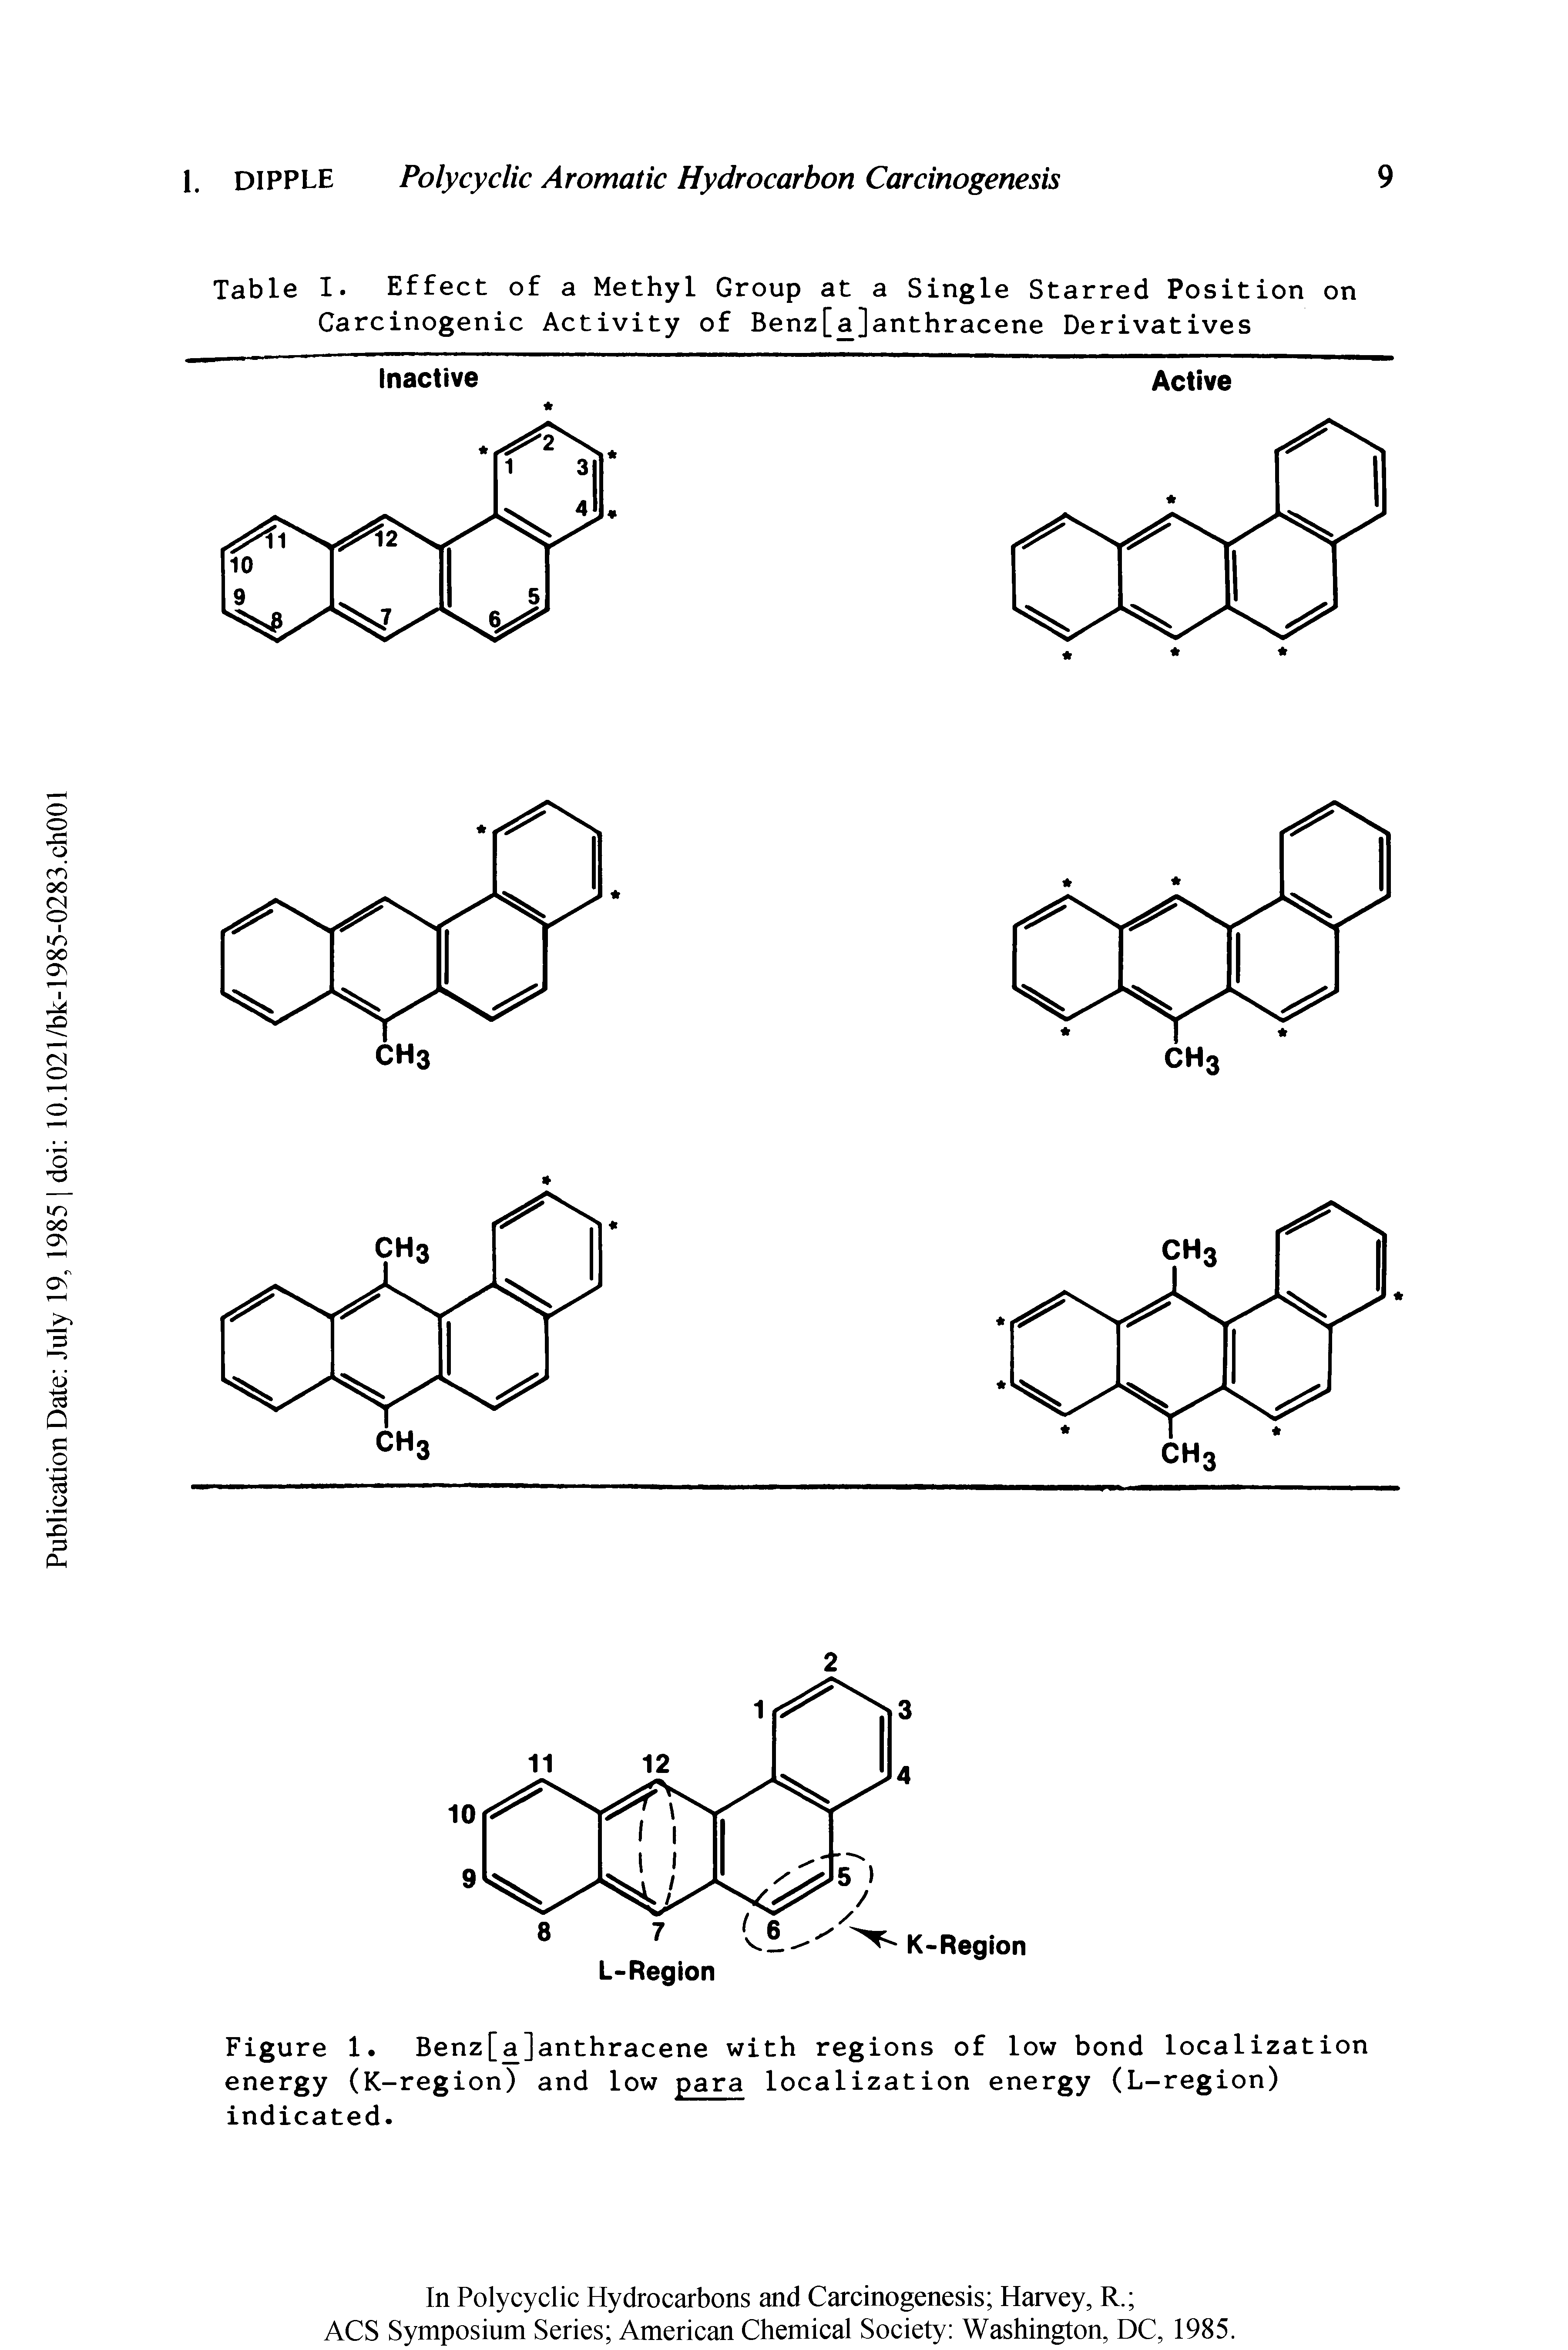 Table I. Effect of a Methyl Group at a Single Starred Position on Carcinogenic Activity of Benz[a]anthracene Derivatives...